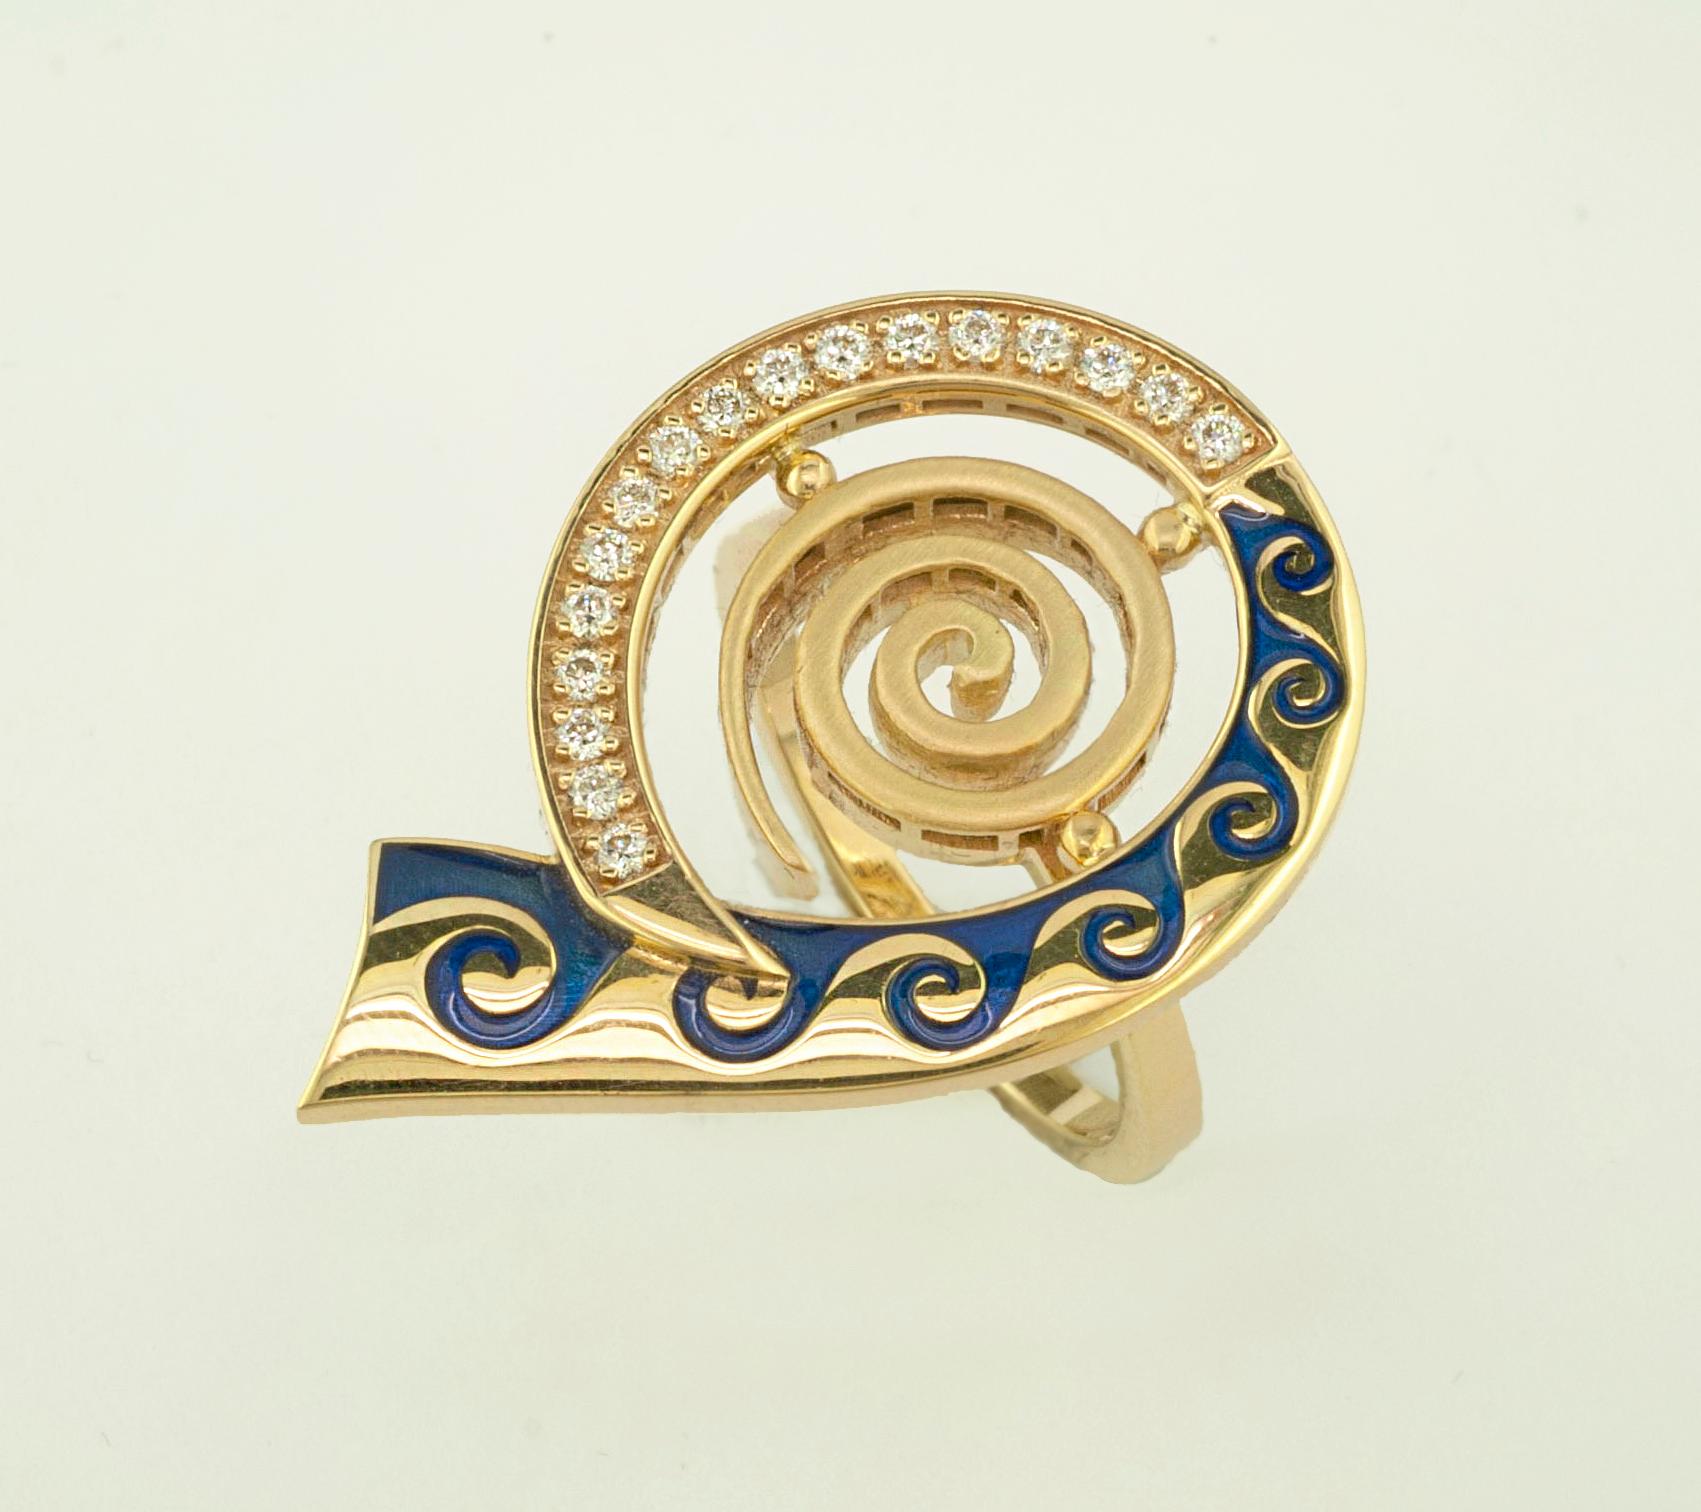 This S.Georgios designer Greek Key ring is handmade from solid 18 Karat Yellow Gold and is carved in a unique Greek Key design to form a beautiful spiral shape. This stunning ring features 17 brilliant-cut White Diamonds total weight of 0.27 Carat